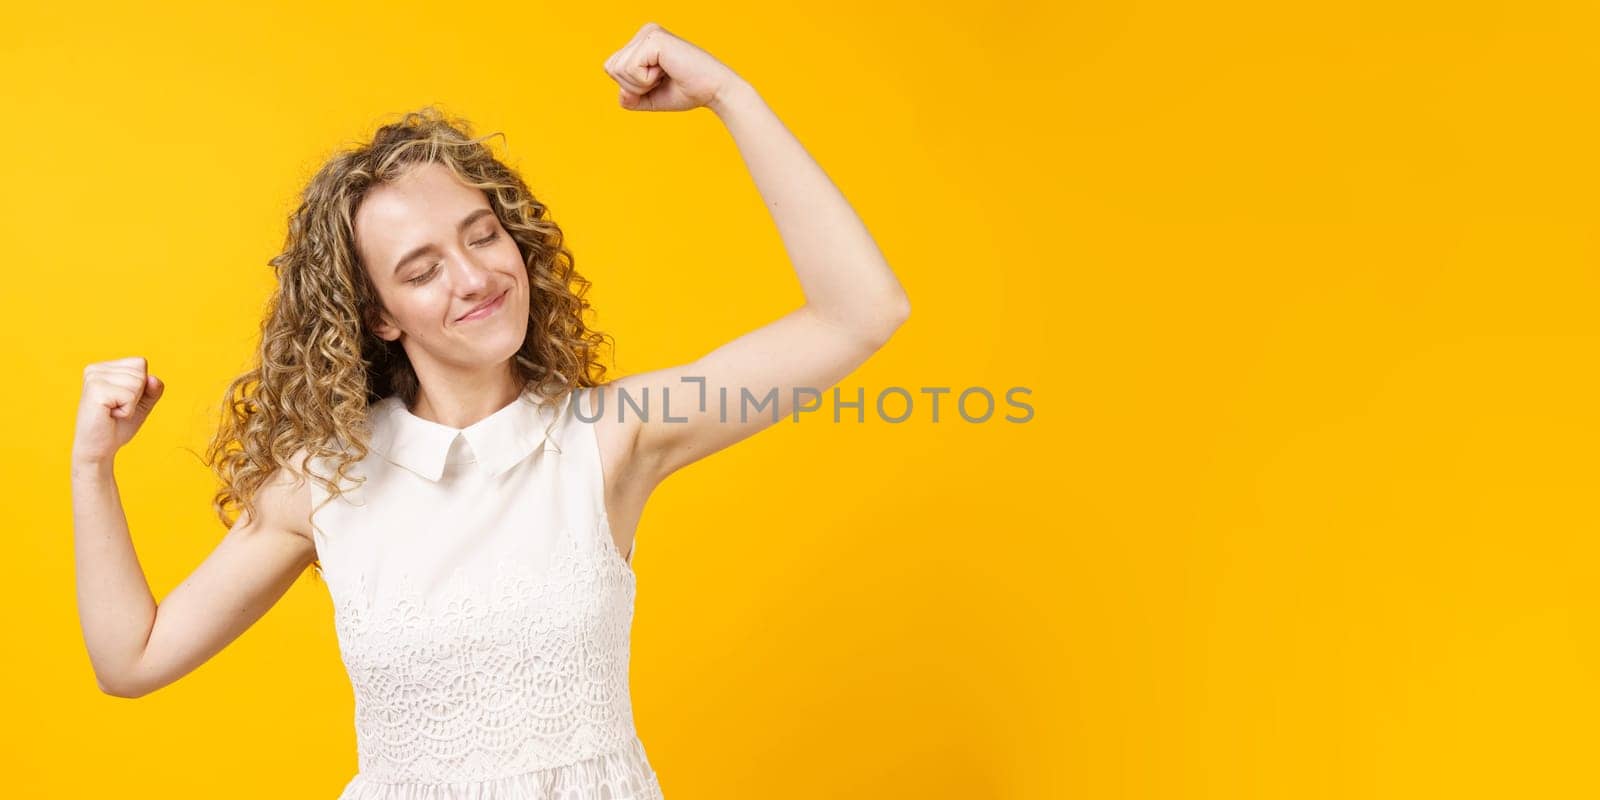 A strong woman with curly hair, a toothy smile, raises her arms and shows her biceps. Models on a yellow background. Look at my muscles